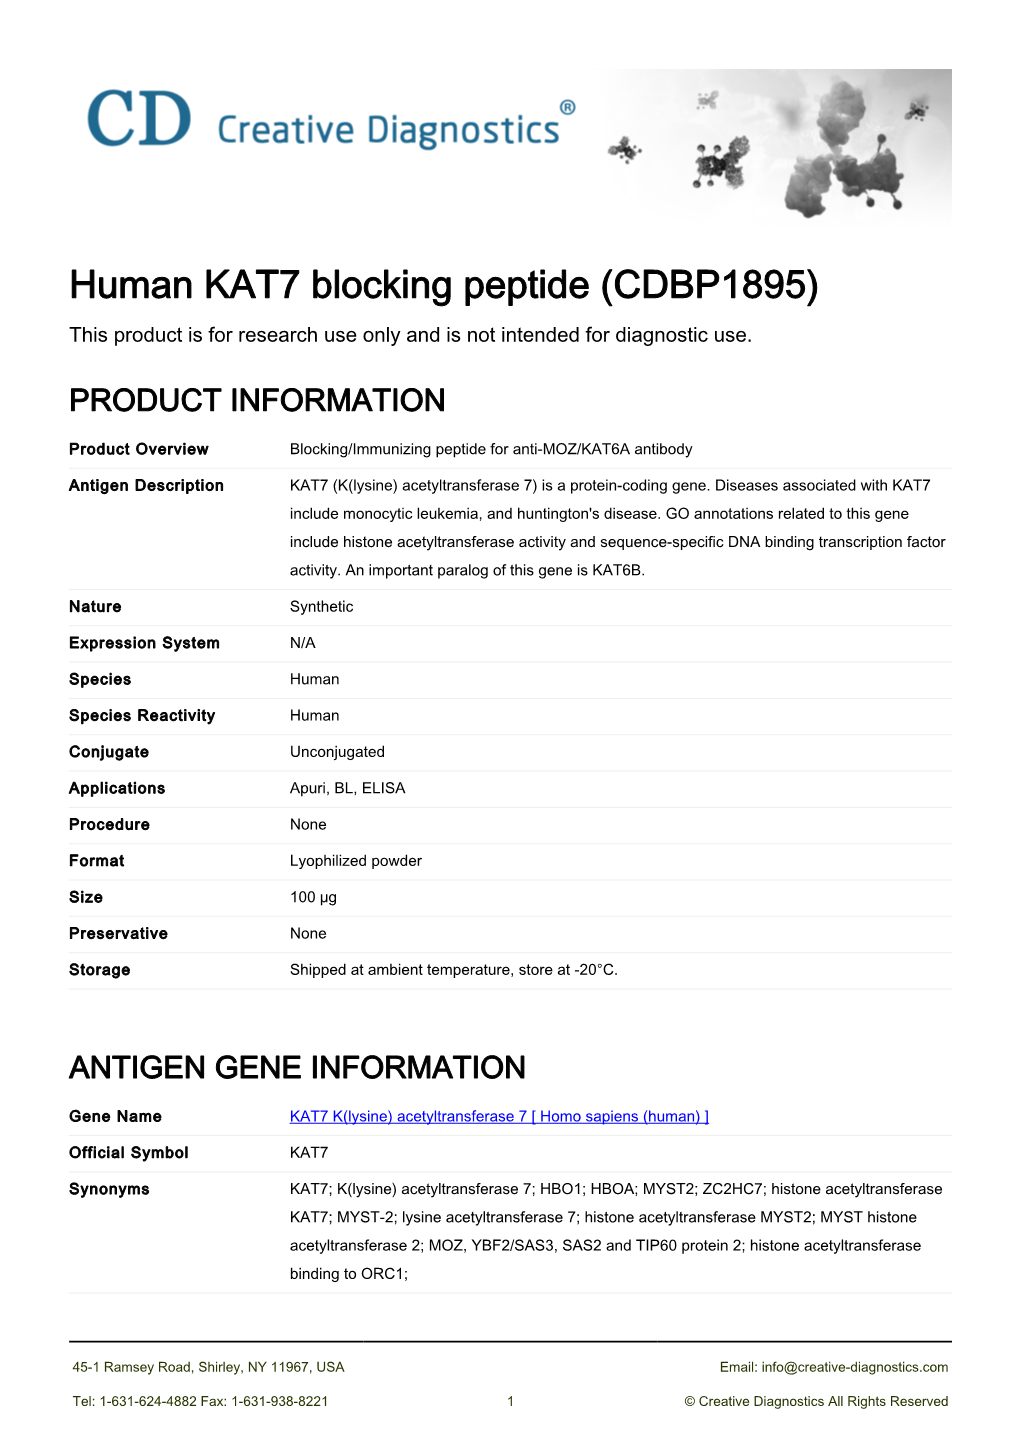 Human KAT7 Blocking Peptide (CDBP1895) This Product Is for Research Use Only and Is Not Intended for Diagnostic Use